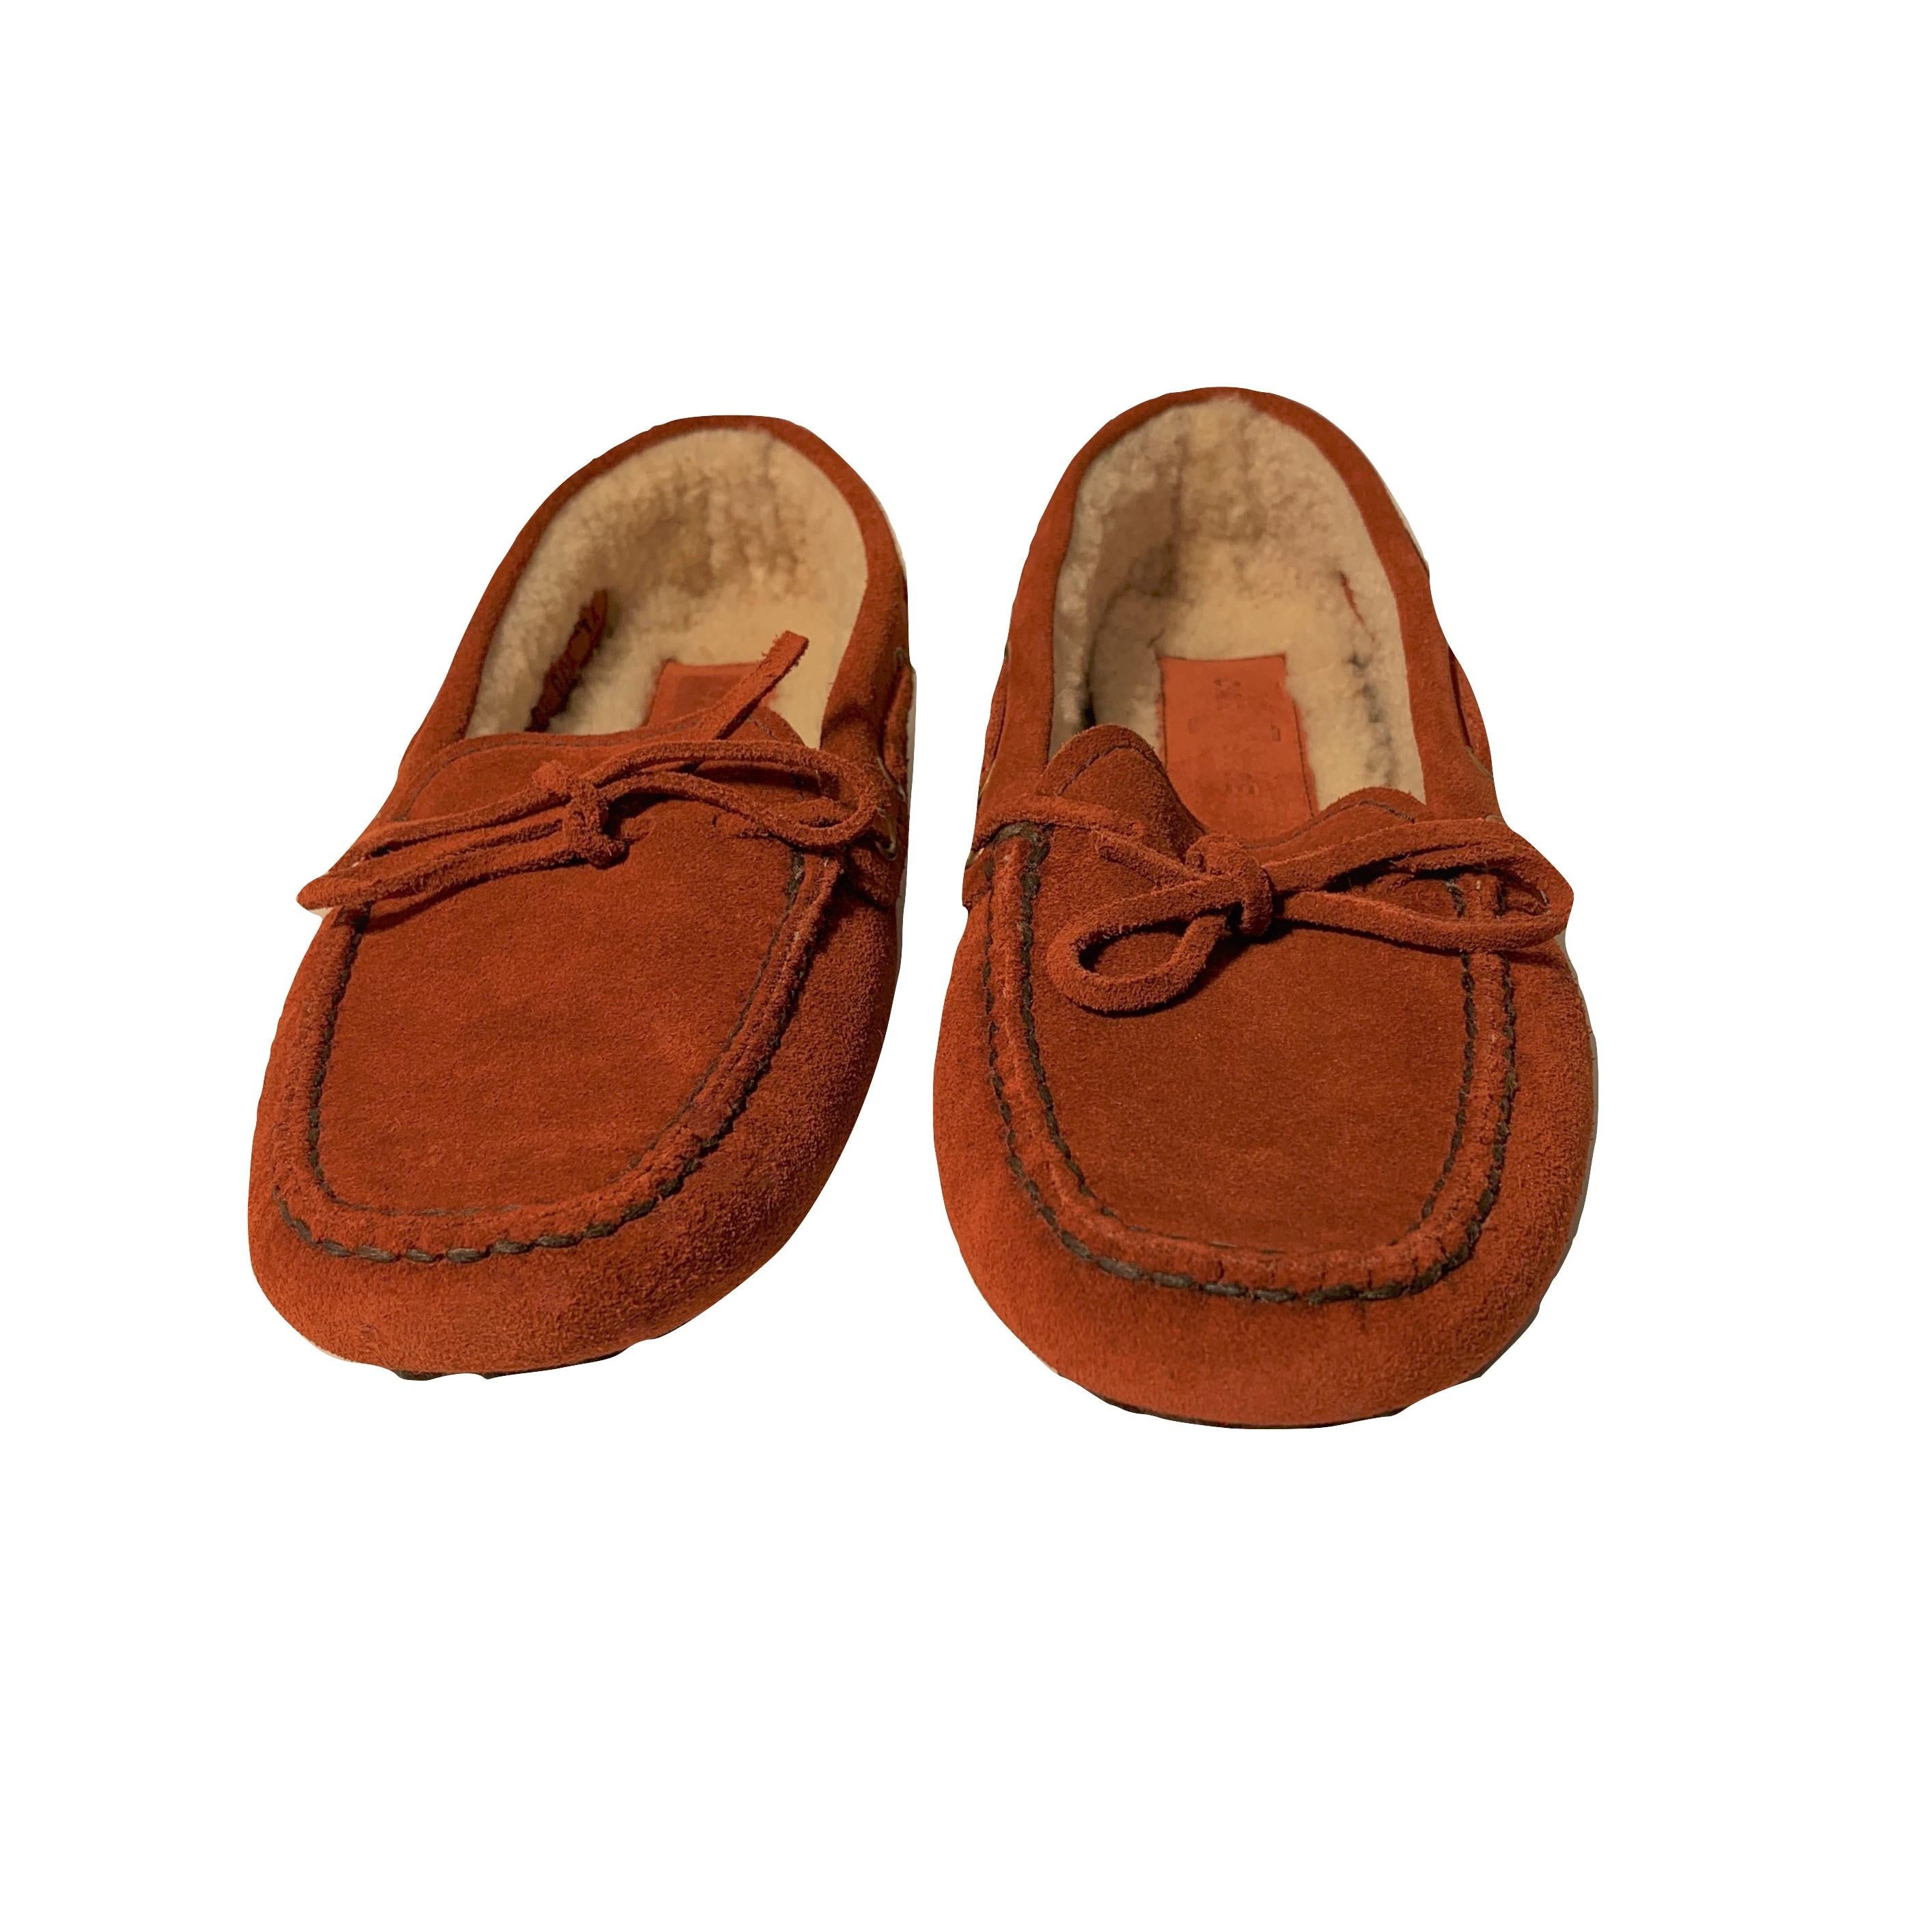  New The Original Prada Car Shoe Flat Moccasin Shearling House Driving  Sz 36 In New Condition In Leesburg, VA